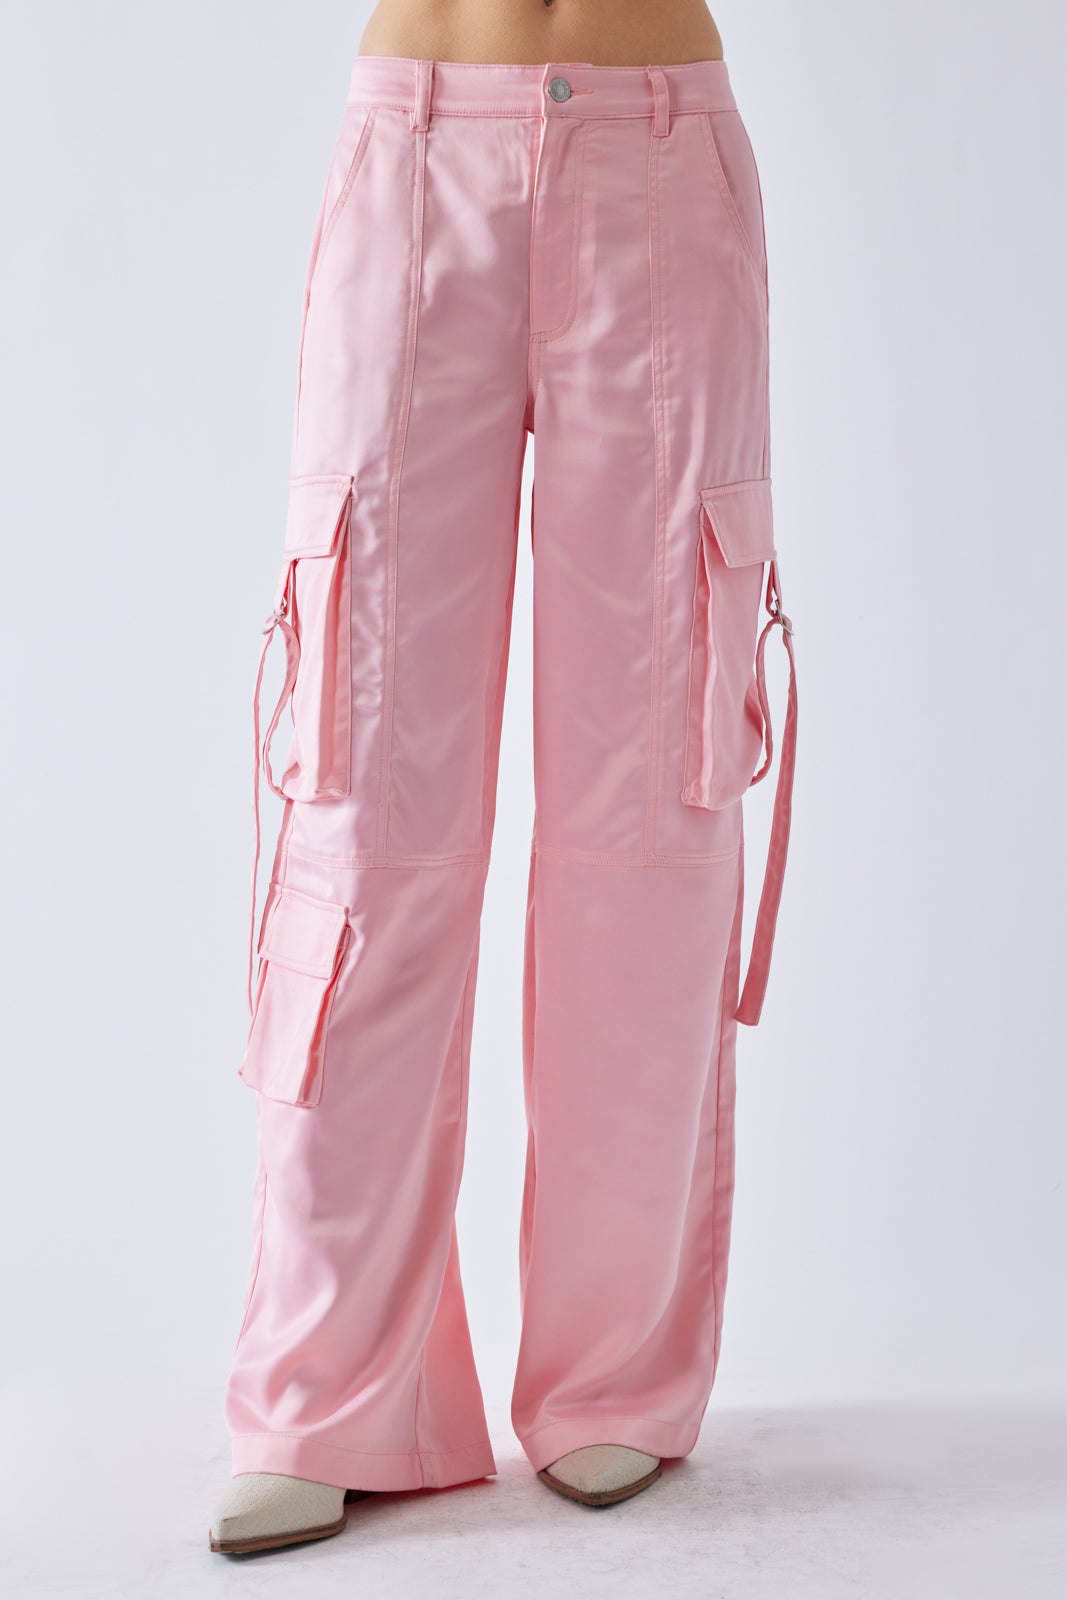 Nude Pink Cargo Pants with buckle belt – Love Hood Couture